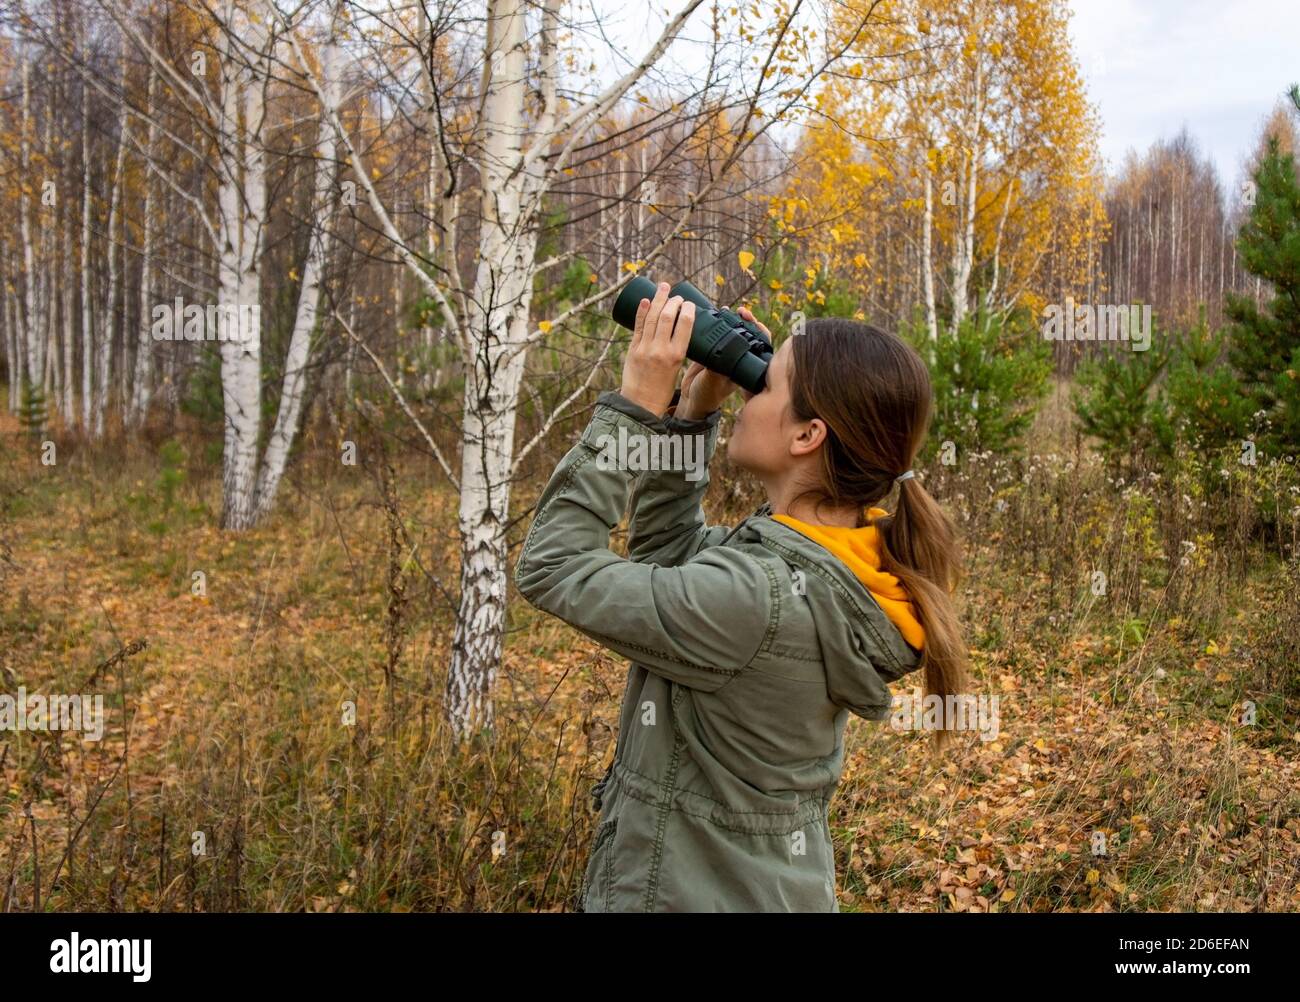 Young woman birdwatcher with binoculars in the autumn forest. Birdwatching, zoology, ecology. Research, observation of animals. Ornithology Stock Photo